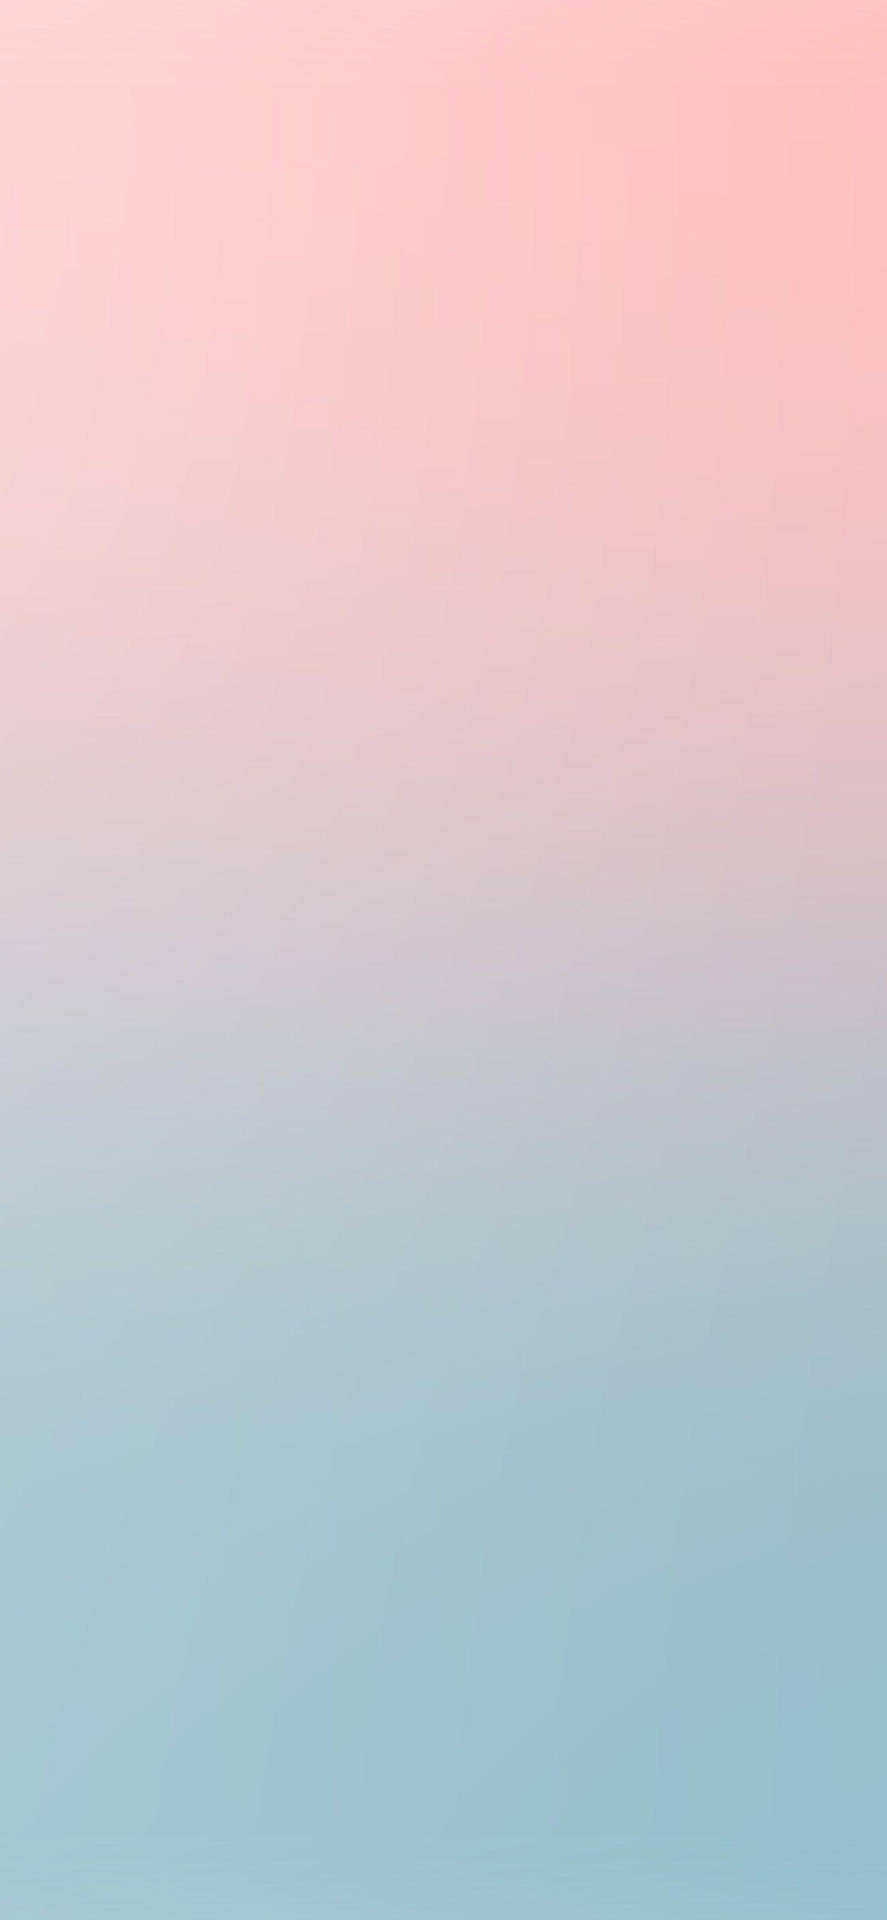 Free Pastel Iphone Wallpaper Downloads, [100+] Pastel Iphone Wallpapers for  FREE 